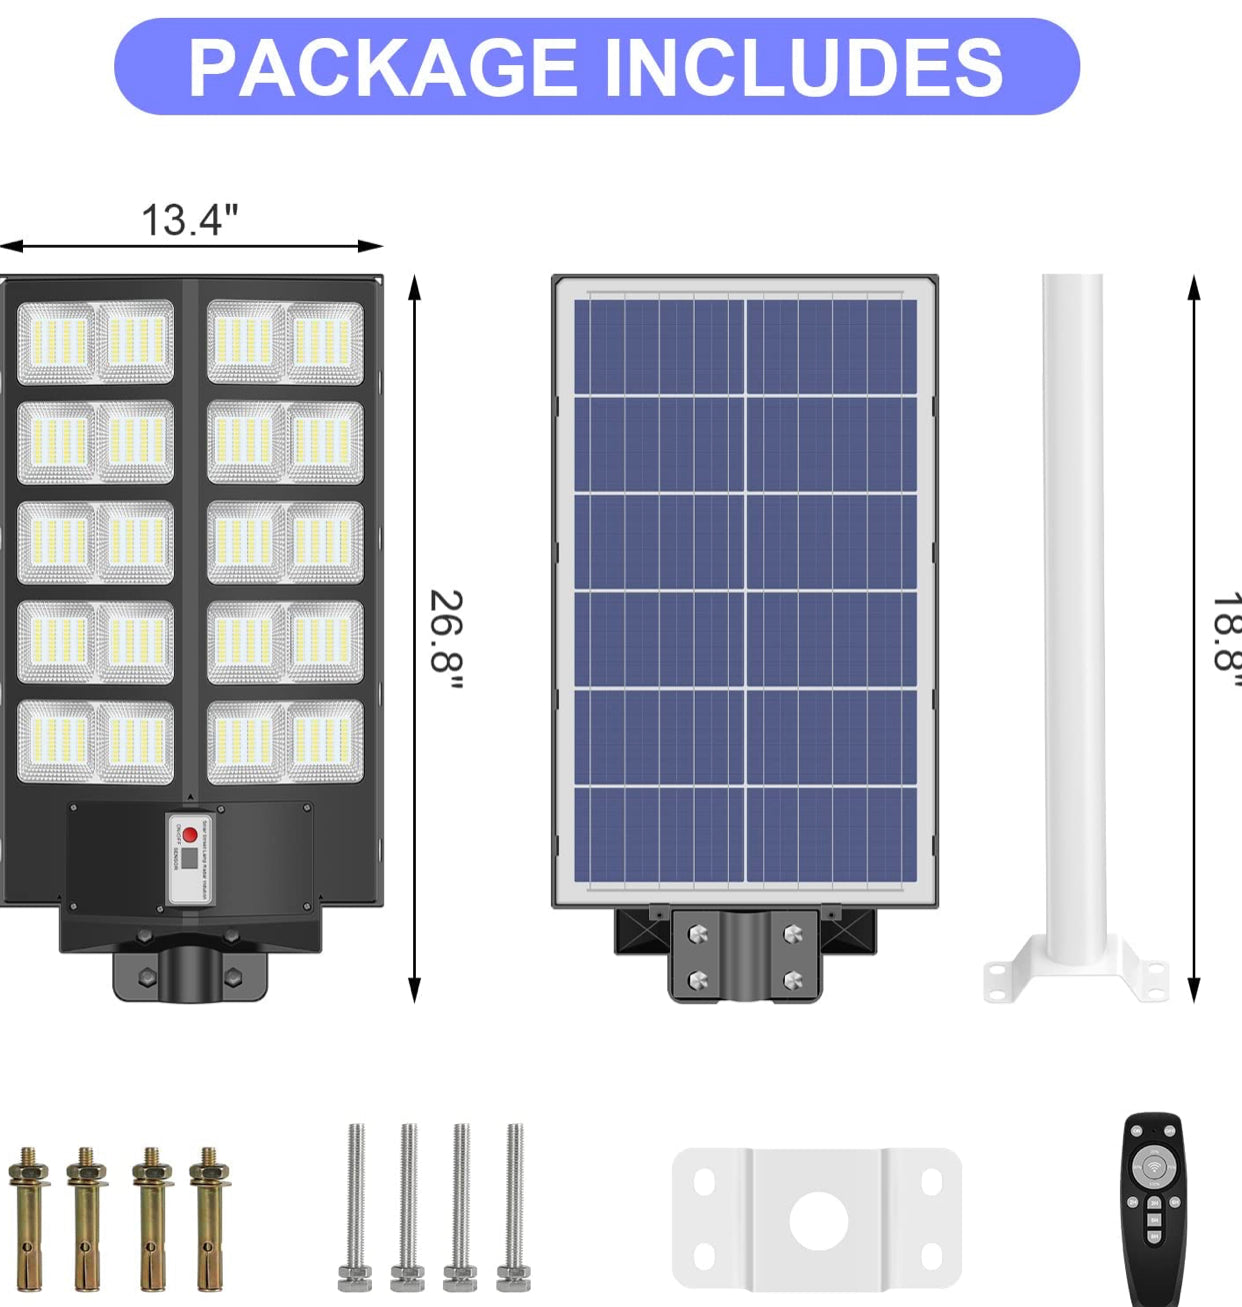 800W Commercial Solar Street Lights Dusk to Dawn , Motion Sensor, 75000LM for Street with Remote Control